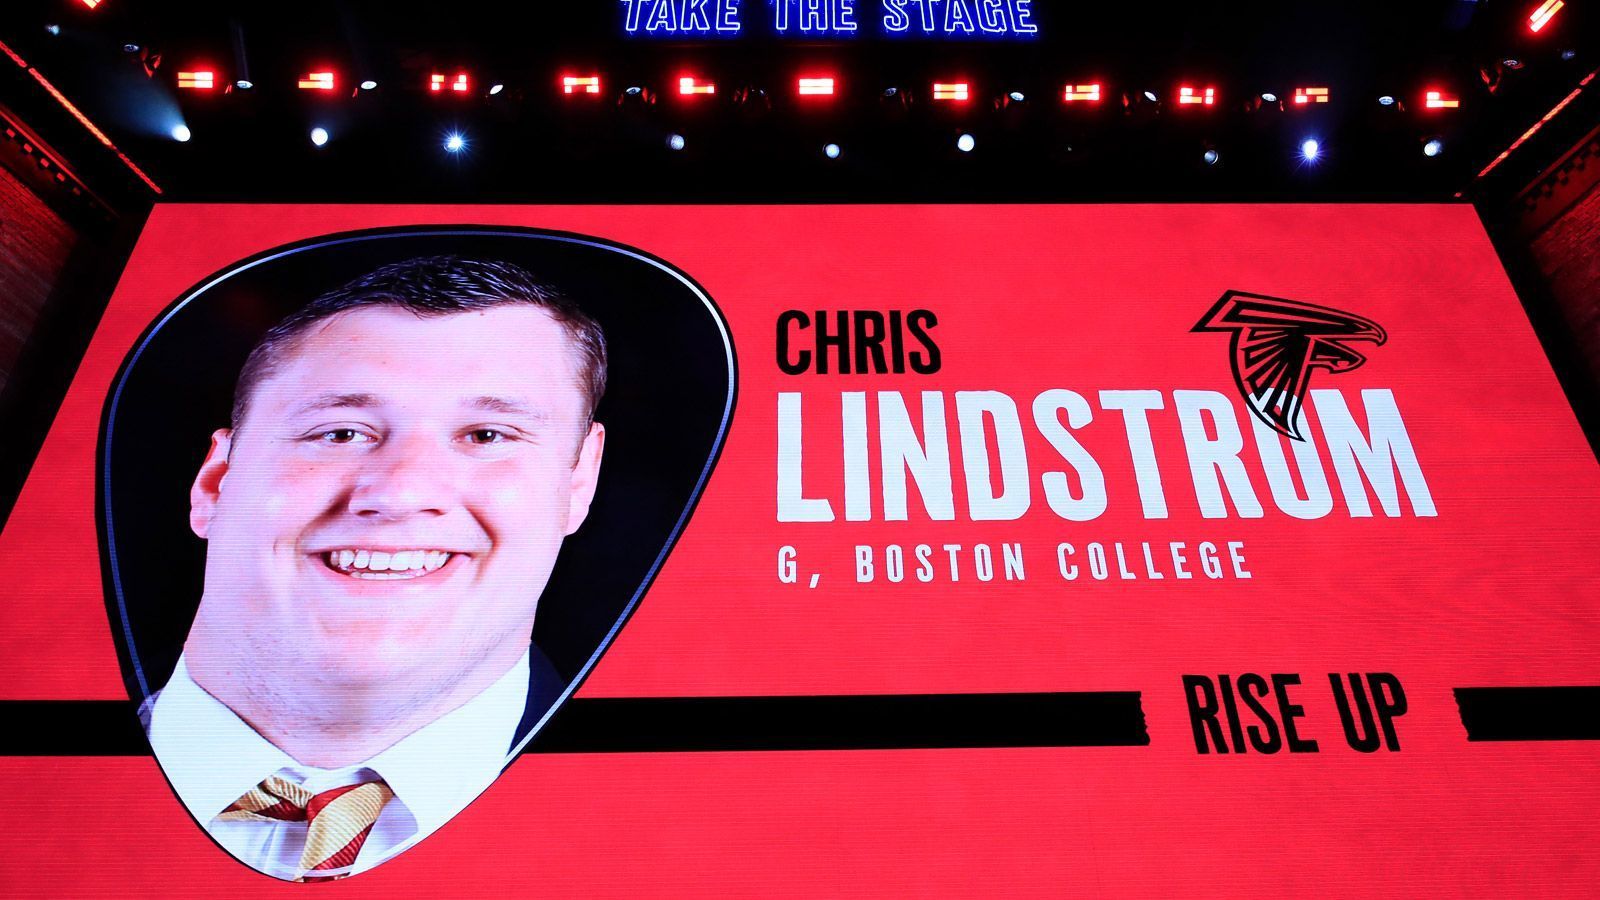 
                <strong>Draft Pick 14: Atlanta Falcons</strong><br>
                Spieler: Chris LindstromPosition: GuardCollege: Boston College
              